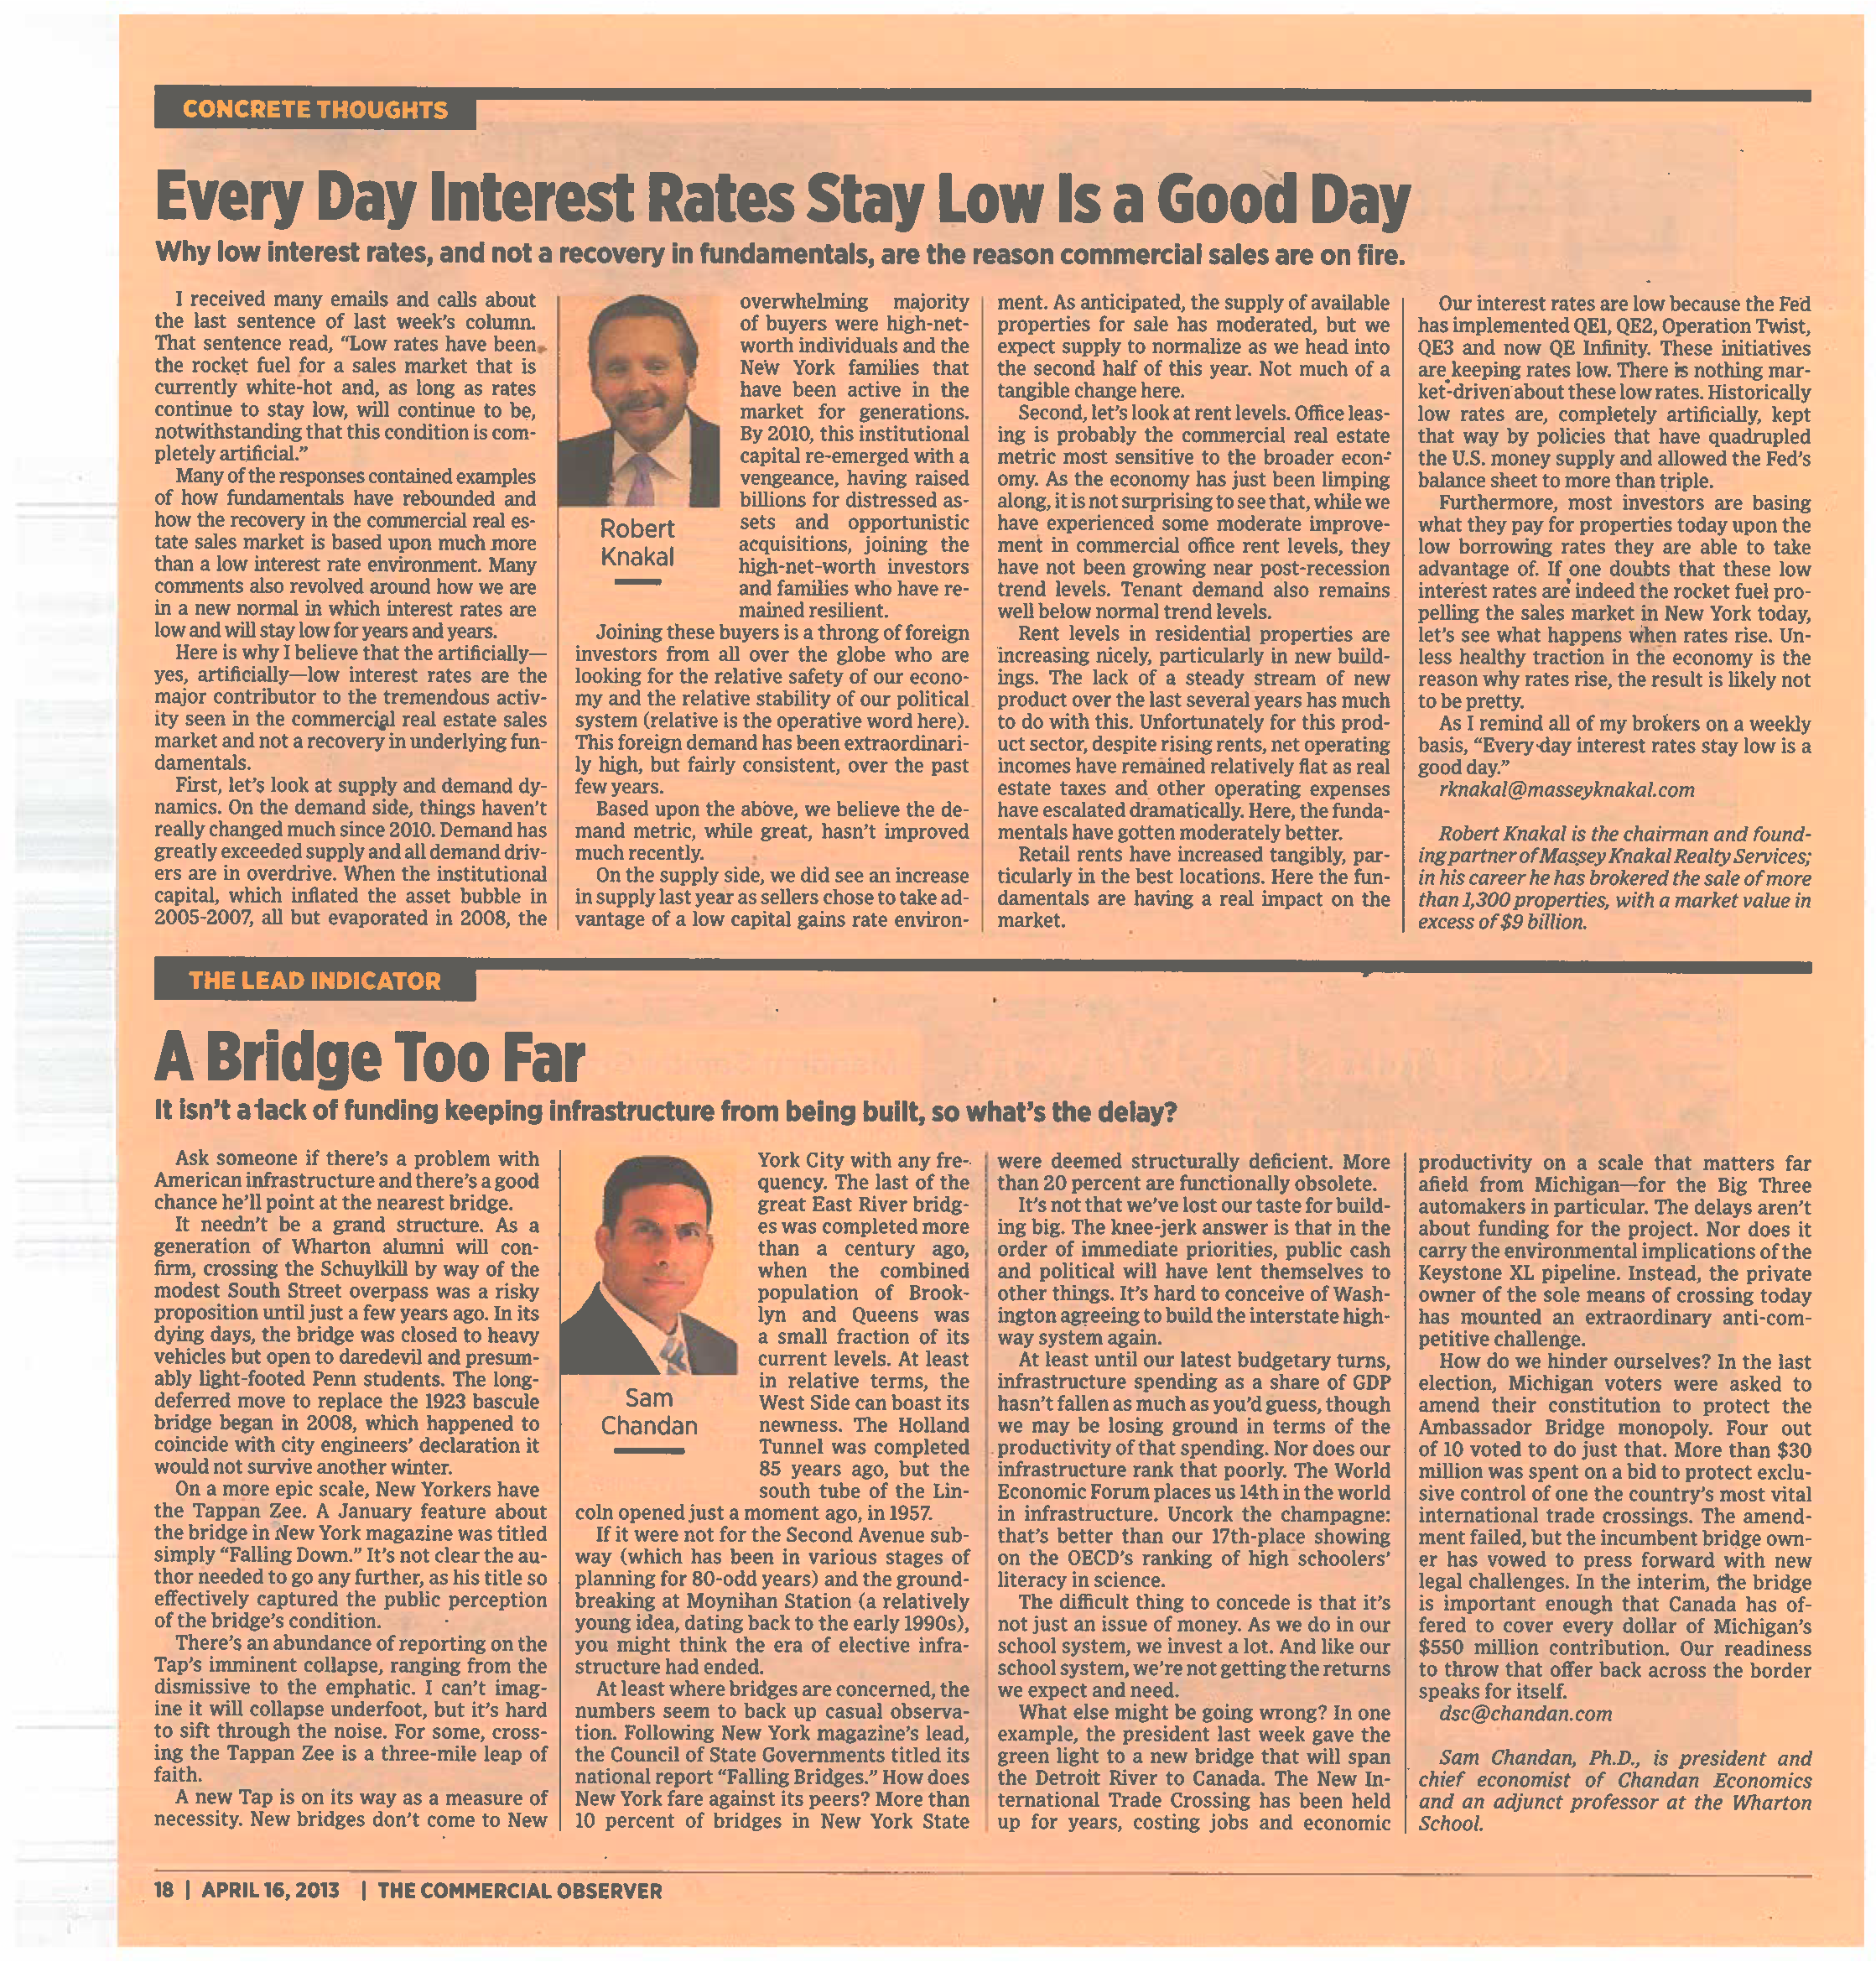 Concrete Thoughts - Every Day Interest Rates Stay Low Is a Good Day - April 16 2013